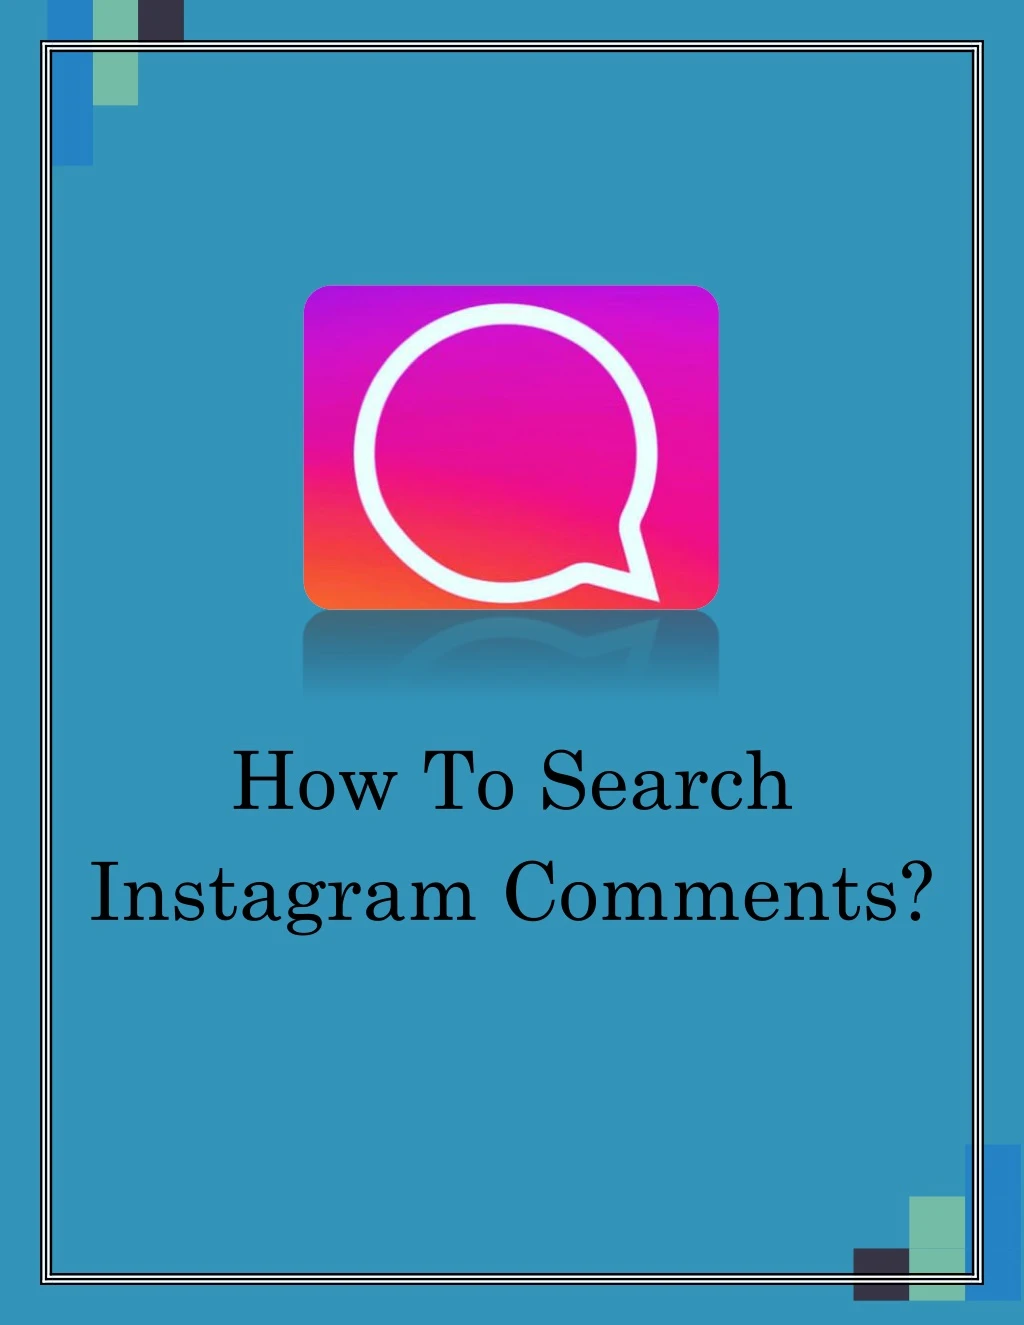 how to search instagram comments